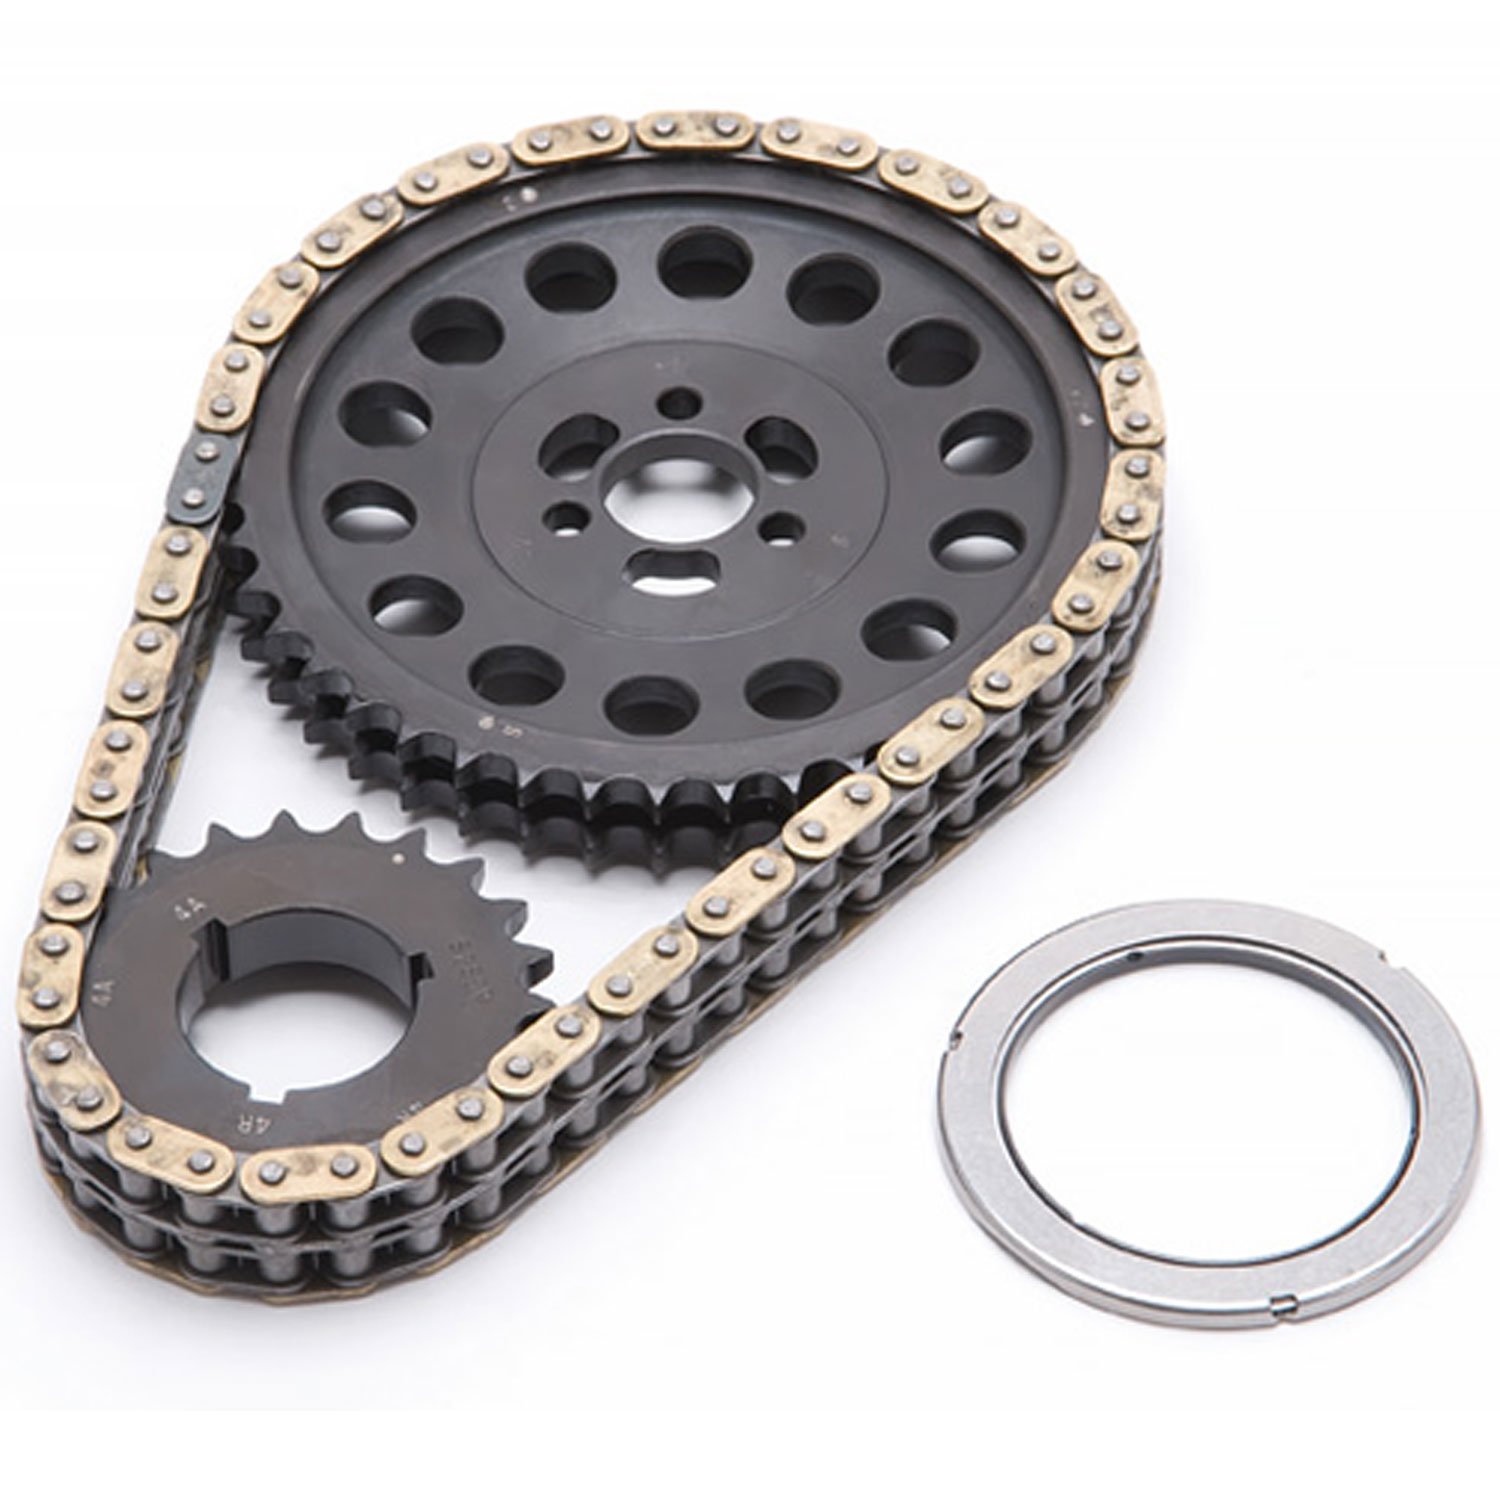 RPM-Link Timing Chain Set for 1955-1995 Small Block Chevy 262-400 V8